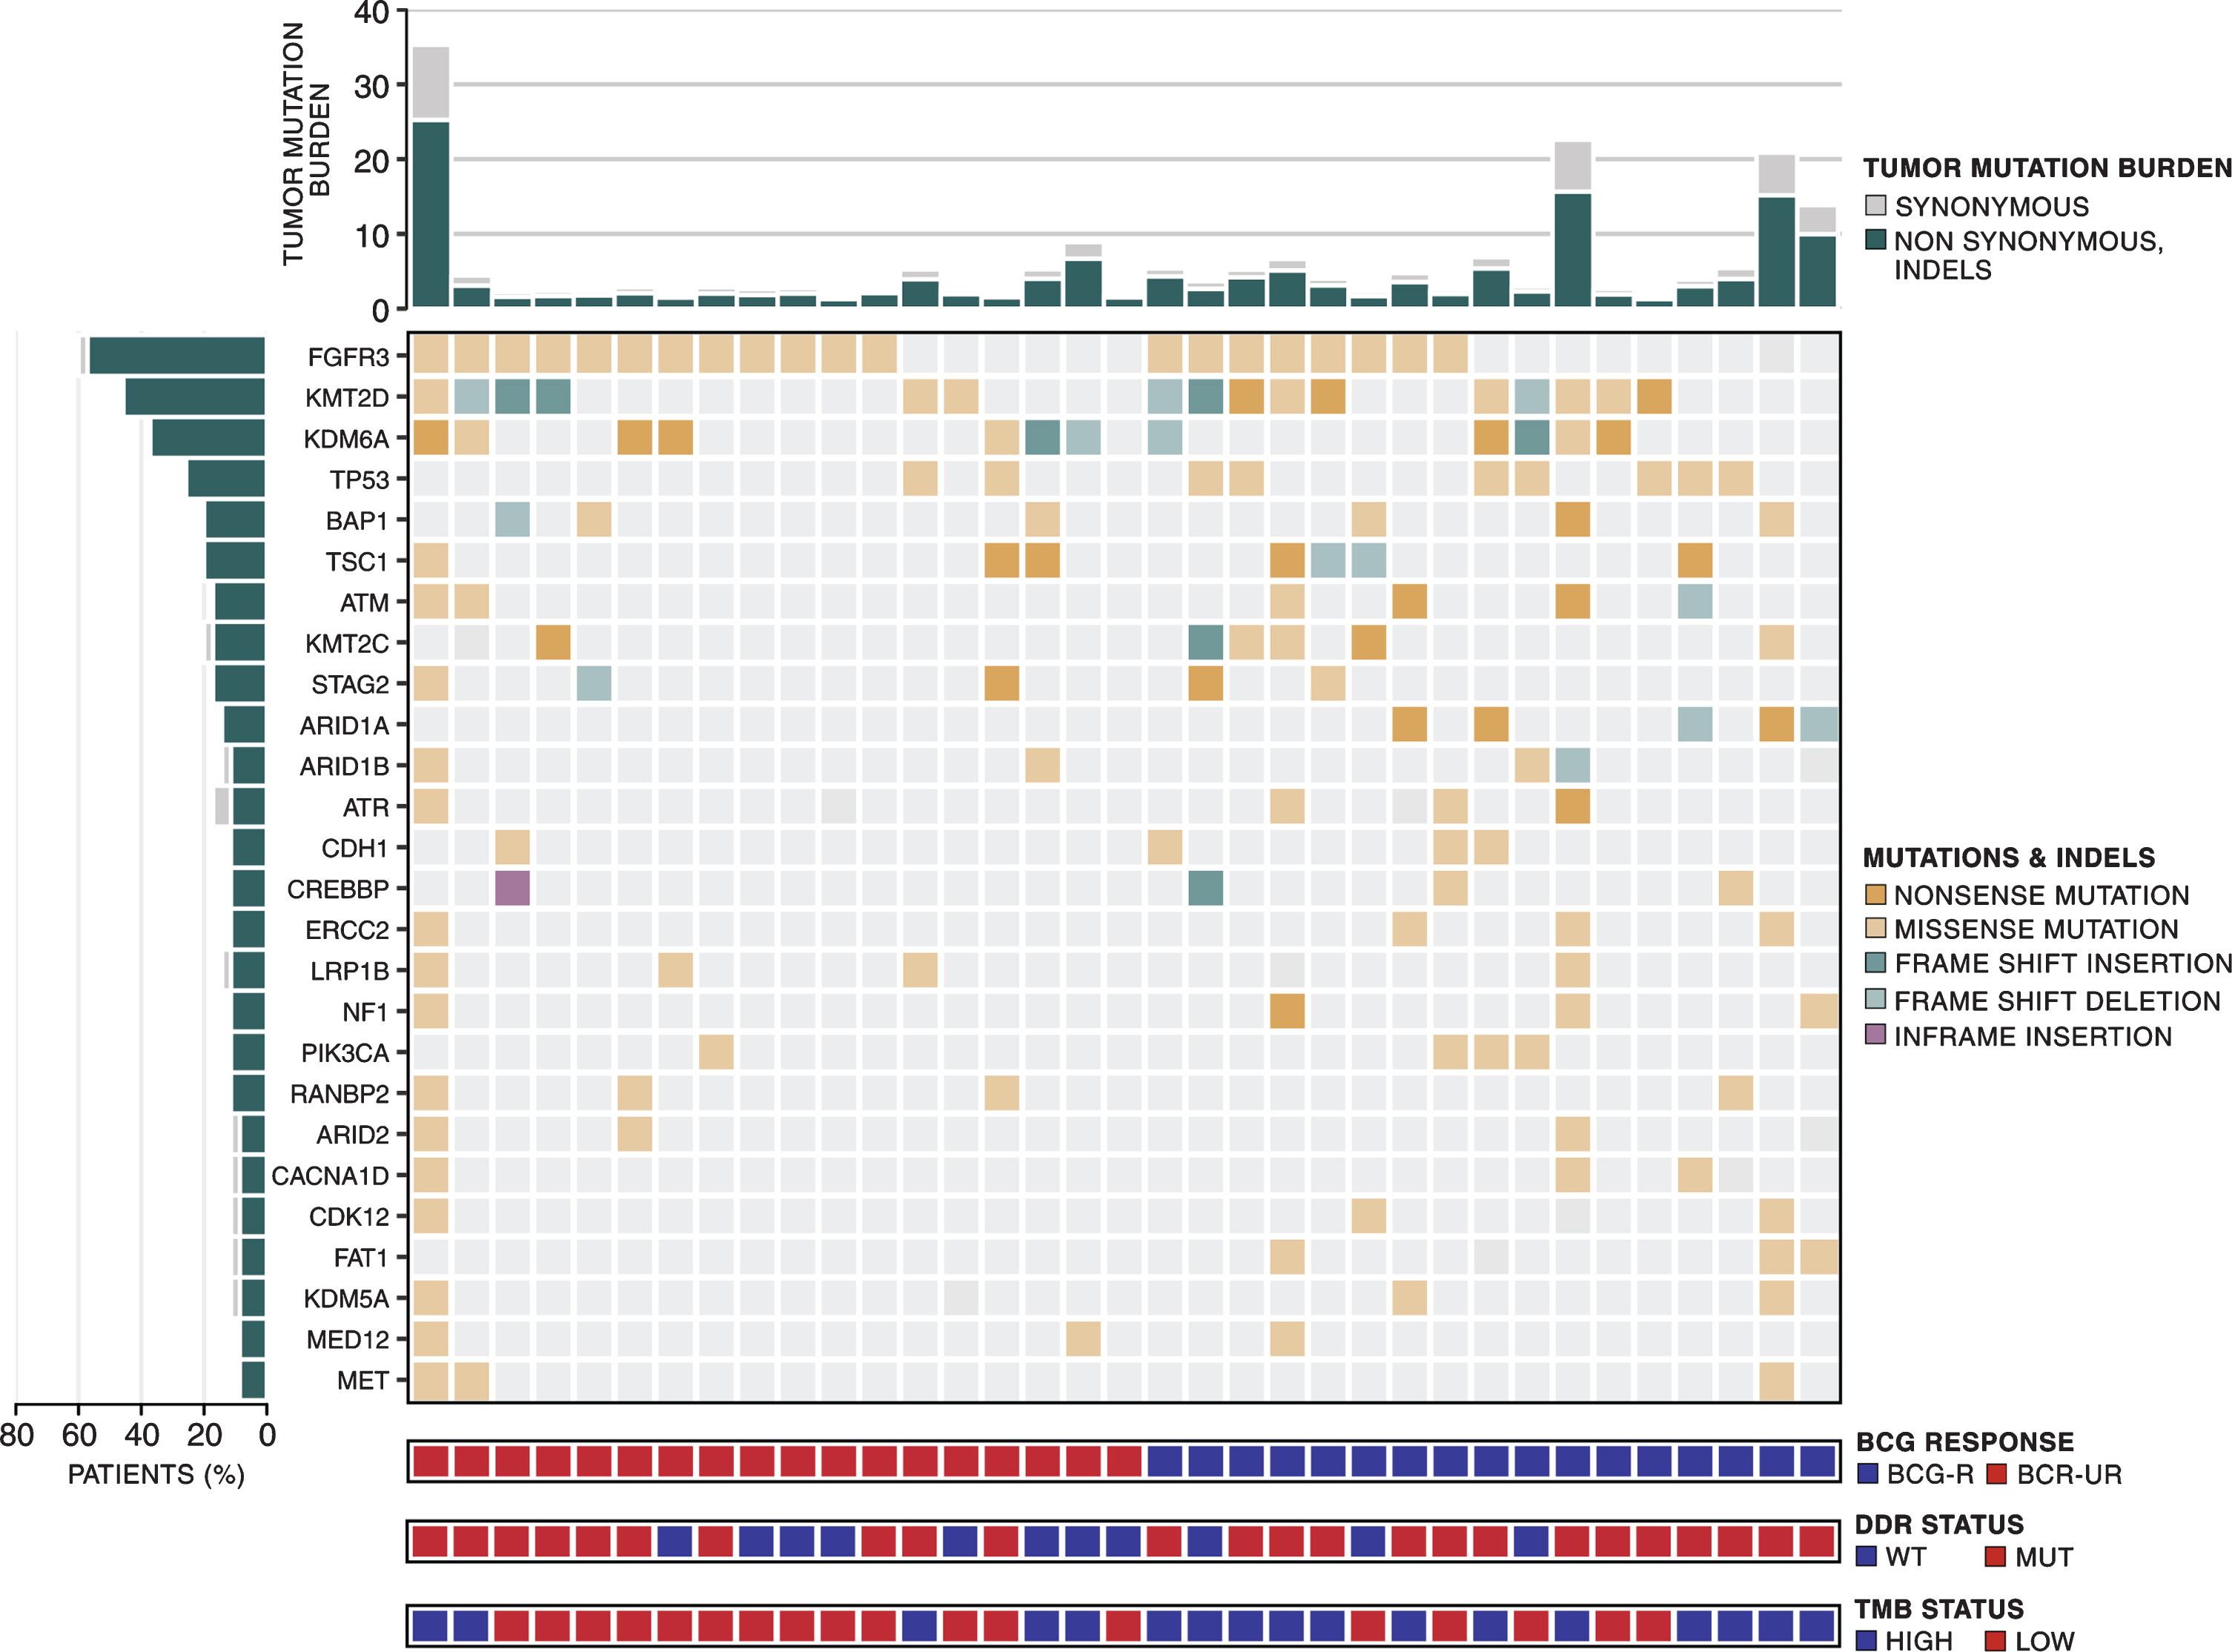 Mutational landscape of high-grade NMIBC. Top to the bottom: tumor mutation burden; somatic mutation pattern of frequently mutated genes (>8%) in 35 NMIBC samples; patient classification according to BCG benefit - responsive (BCG-R - blue) and unresponsive (BCG-UR - red); patient classification according to DDR status –wild-type (blue) and mutated (red); patient classification according to TMB status –high (blue) and low (red).